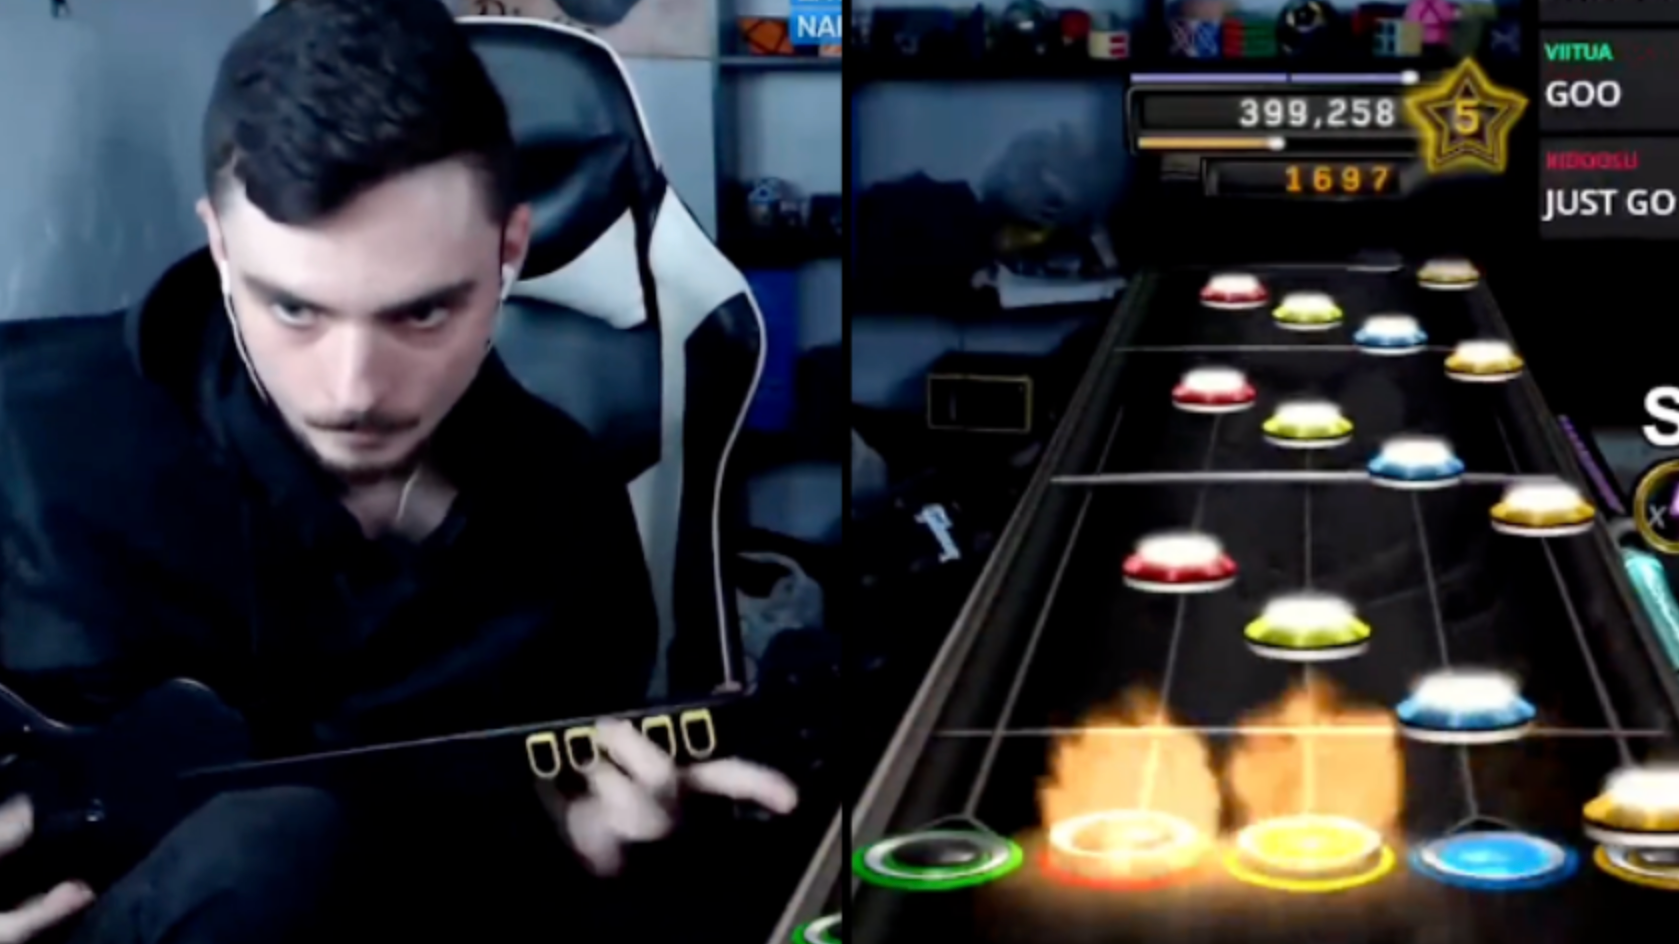 Kerrang! on X: This gamer has somehow beaten the world record on Guitar  Hero, playing DragonForce's notoriously difficult Through The Fire And  Flames at 165 per cent speed 🤯    /